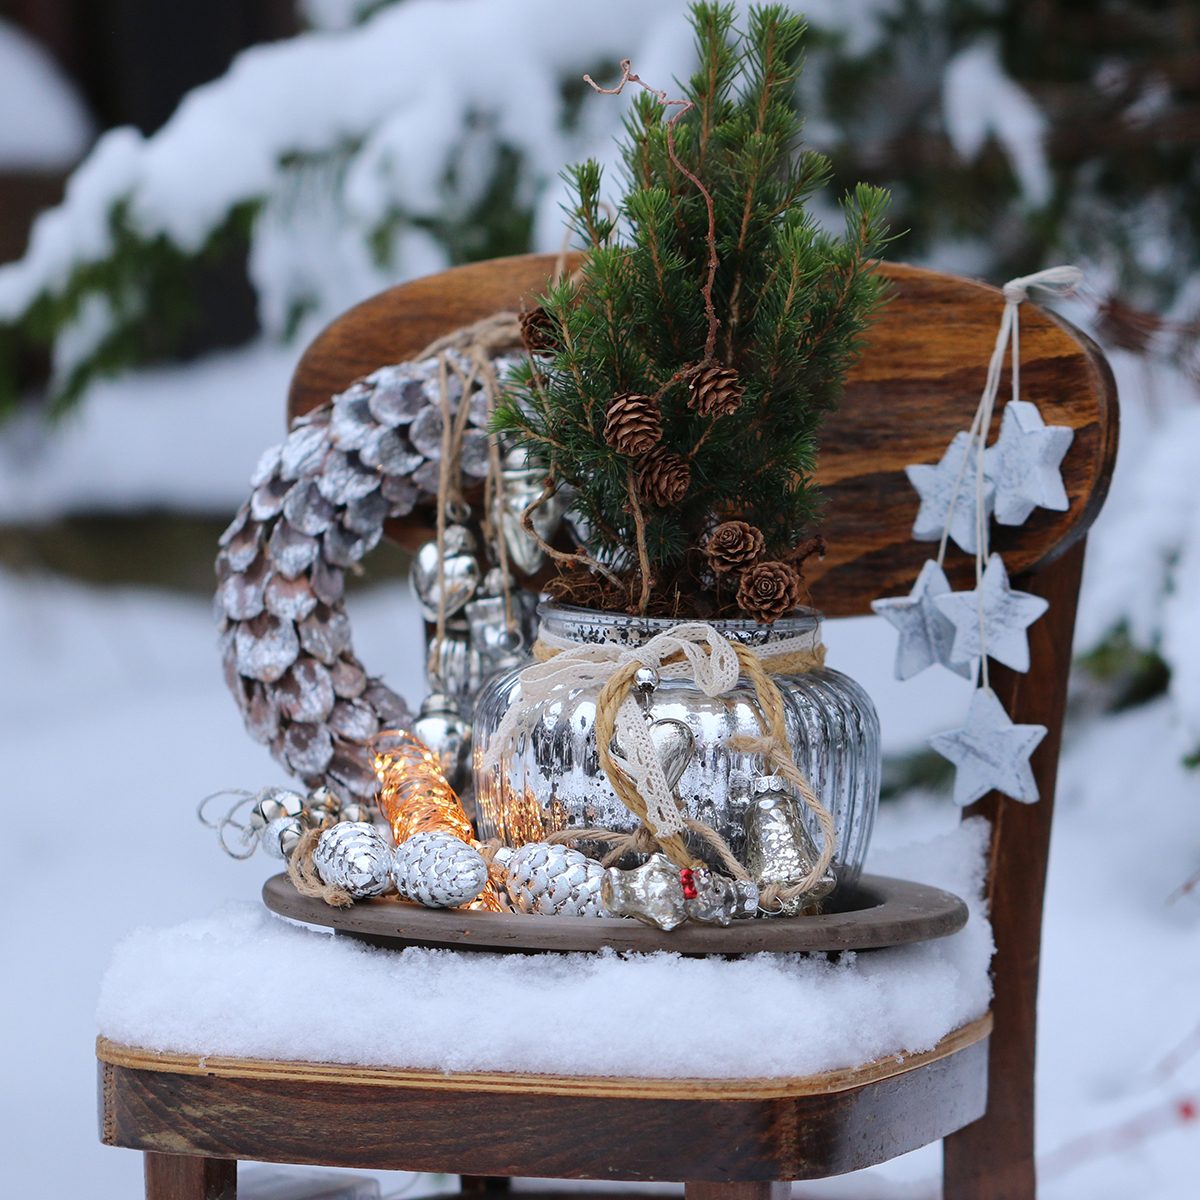 Winter composition with Christmas wreath, glass decoration, garland, fir tree, wooden star on vintage wooden child chair on snow, natural background, outdoor and space, scene in snow garden